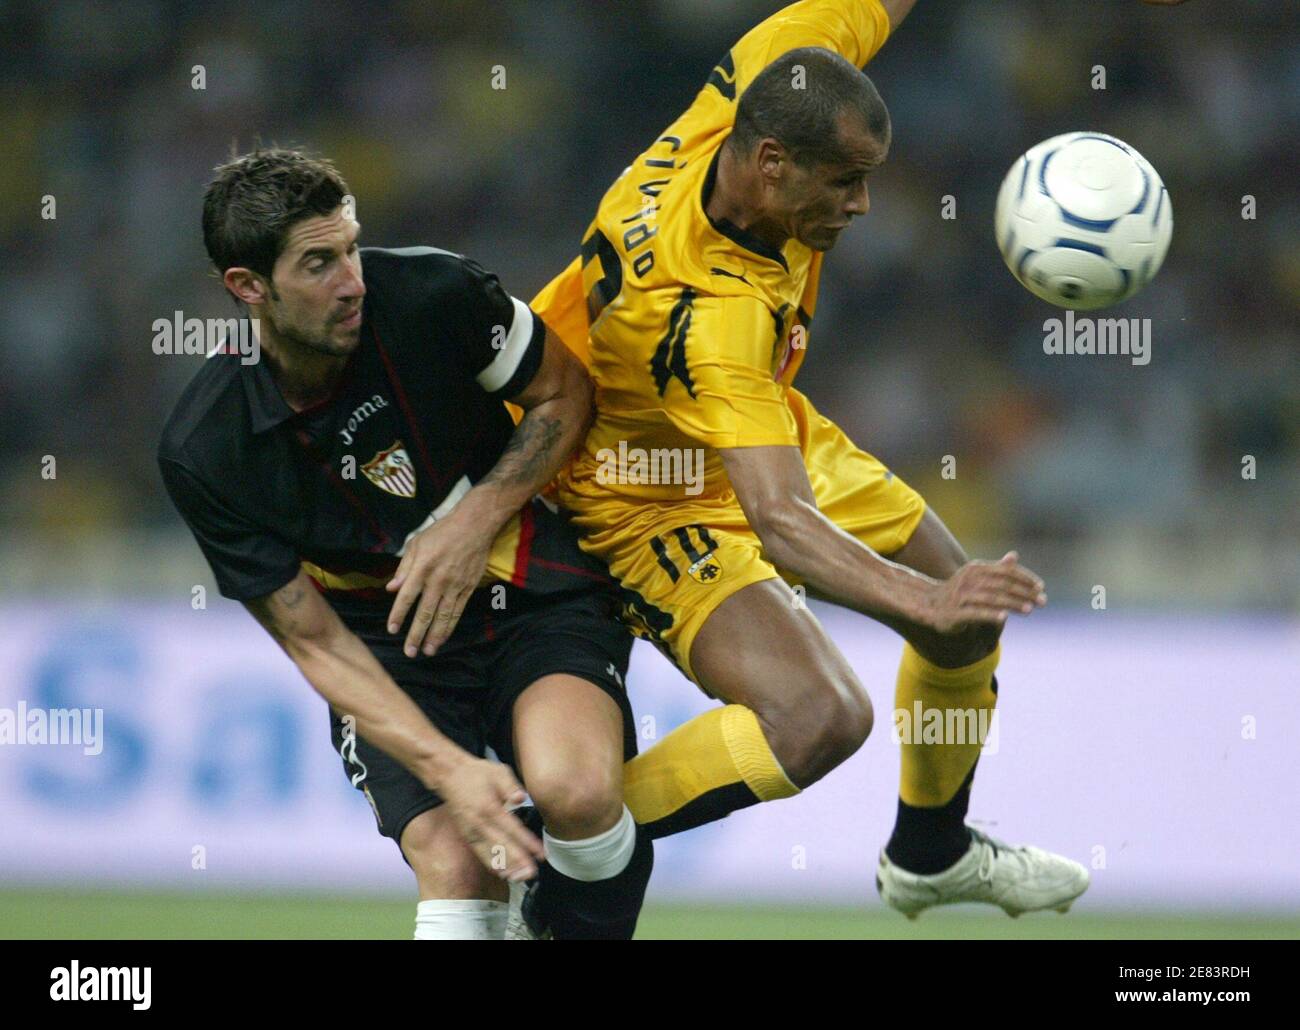 AEK Athens' Rivaldo (R) fights for the ball with Sevilla's Ivica  Dragutinovic during their Champions League qualifying soccer match at  Olympic stadium in Athens September 3, 2007. REUTERS/John Kolesidis (GREECE  Stock Photo -